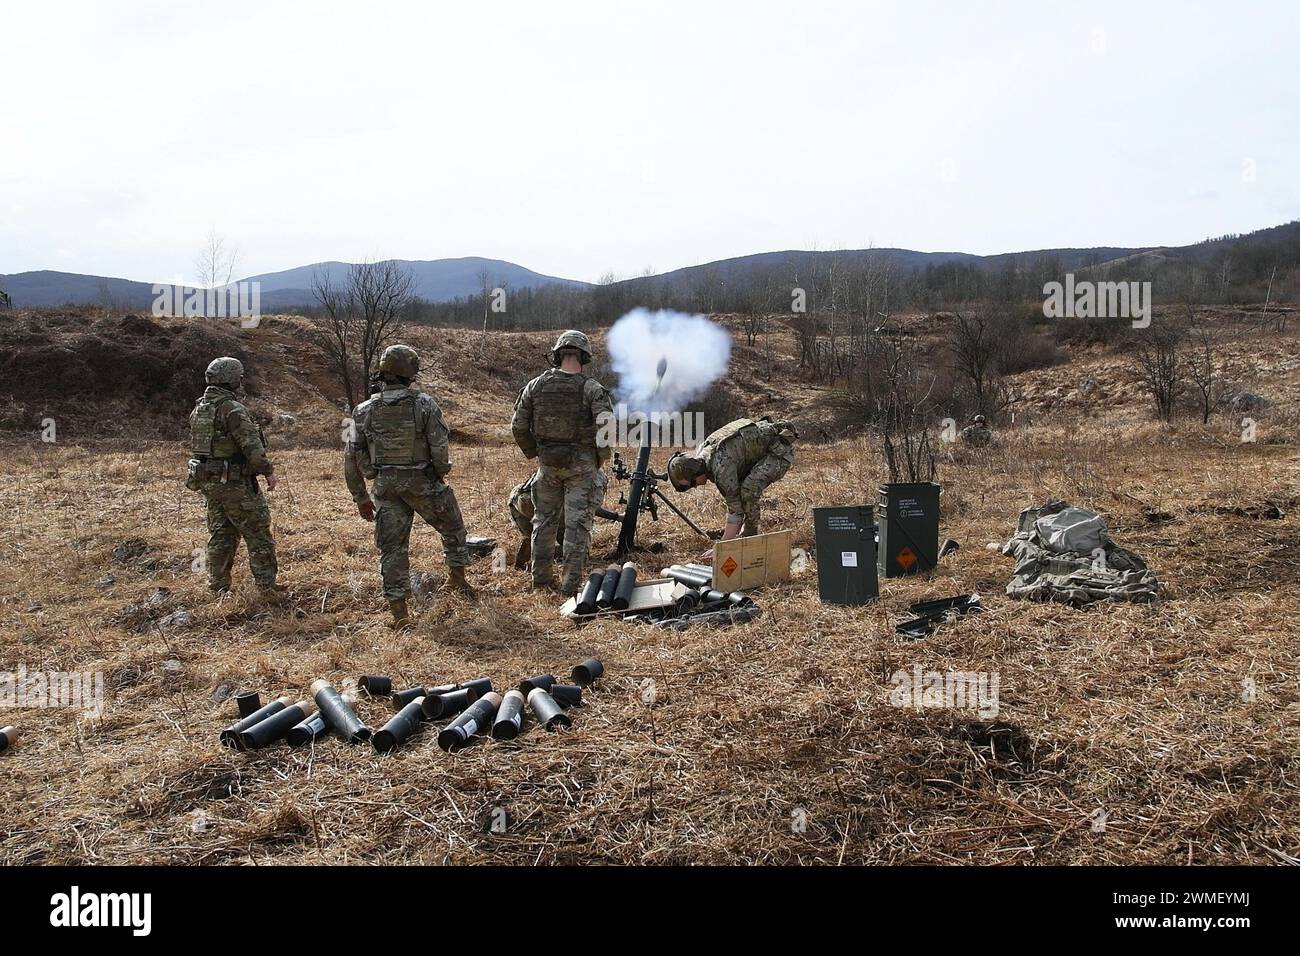 U.S. Army Paratroopers assigned to the 1st Battalion, 503rd Infantry Regiment, 173rd Airborne Brigade fire an  M252 81 mm mortar system during Eagle Ursa exercise at the training range in Slunj, Croatia, Feb. 24, 2024. The 173rd Airborne Brigade is the U.S. Army's Contingency Response Force in Europe, providing rapidly deployable forces to the United States European, African, and Central Command areas of responsibility. Forward deployed across Italy and Germany, the brigade routinely trains alongside NATO allies and partners to build partnerships and strengthen the alliance. (U.S. Army photo b Stock Photo